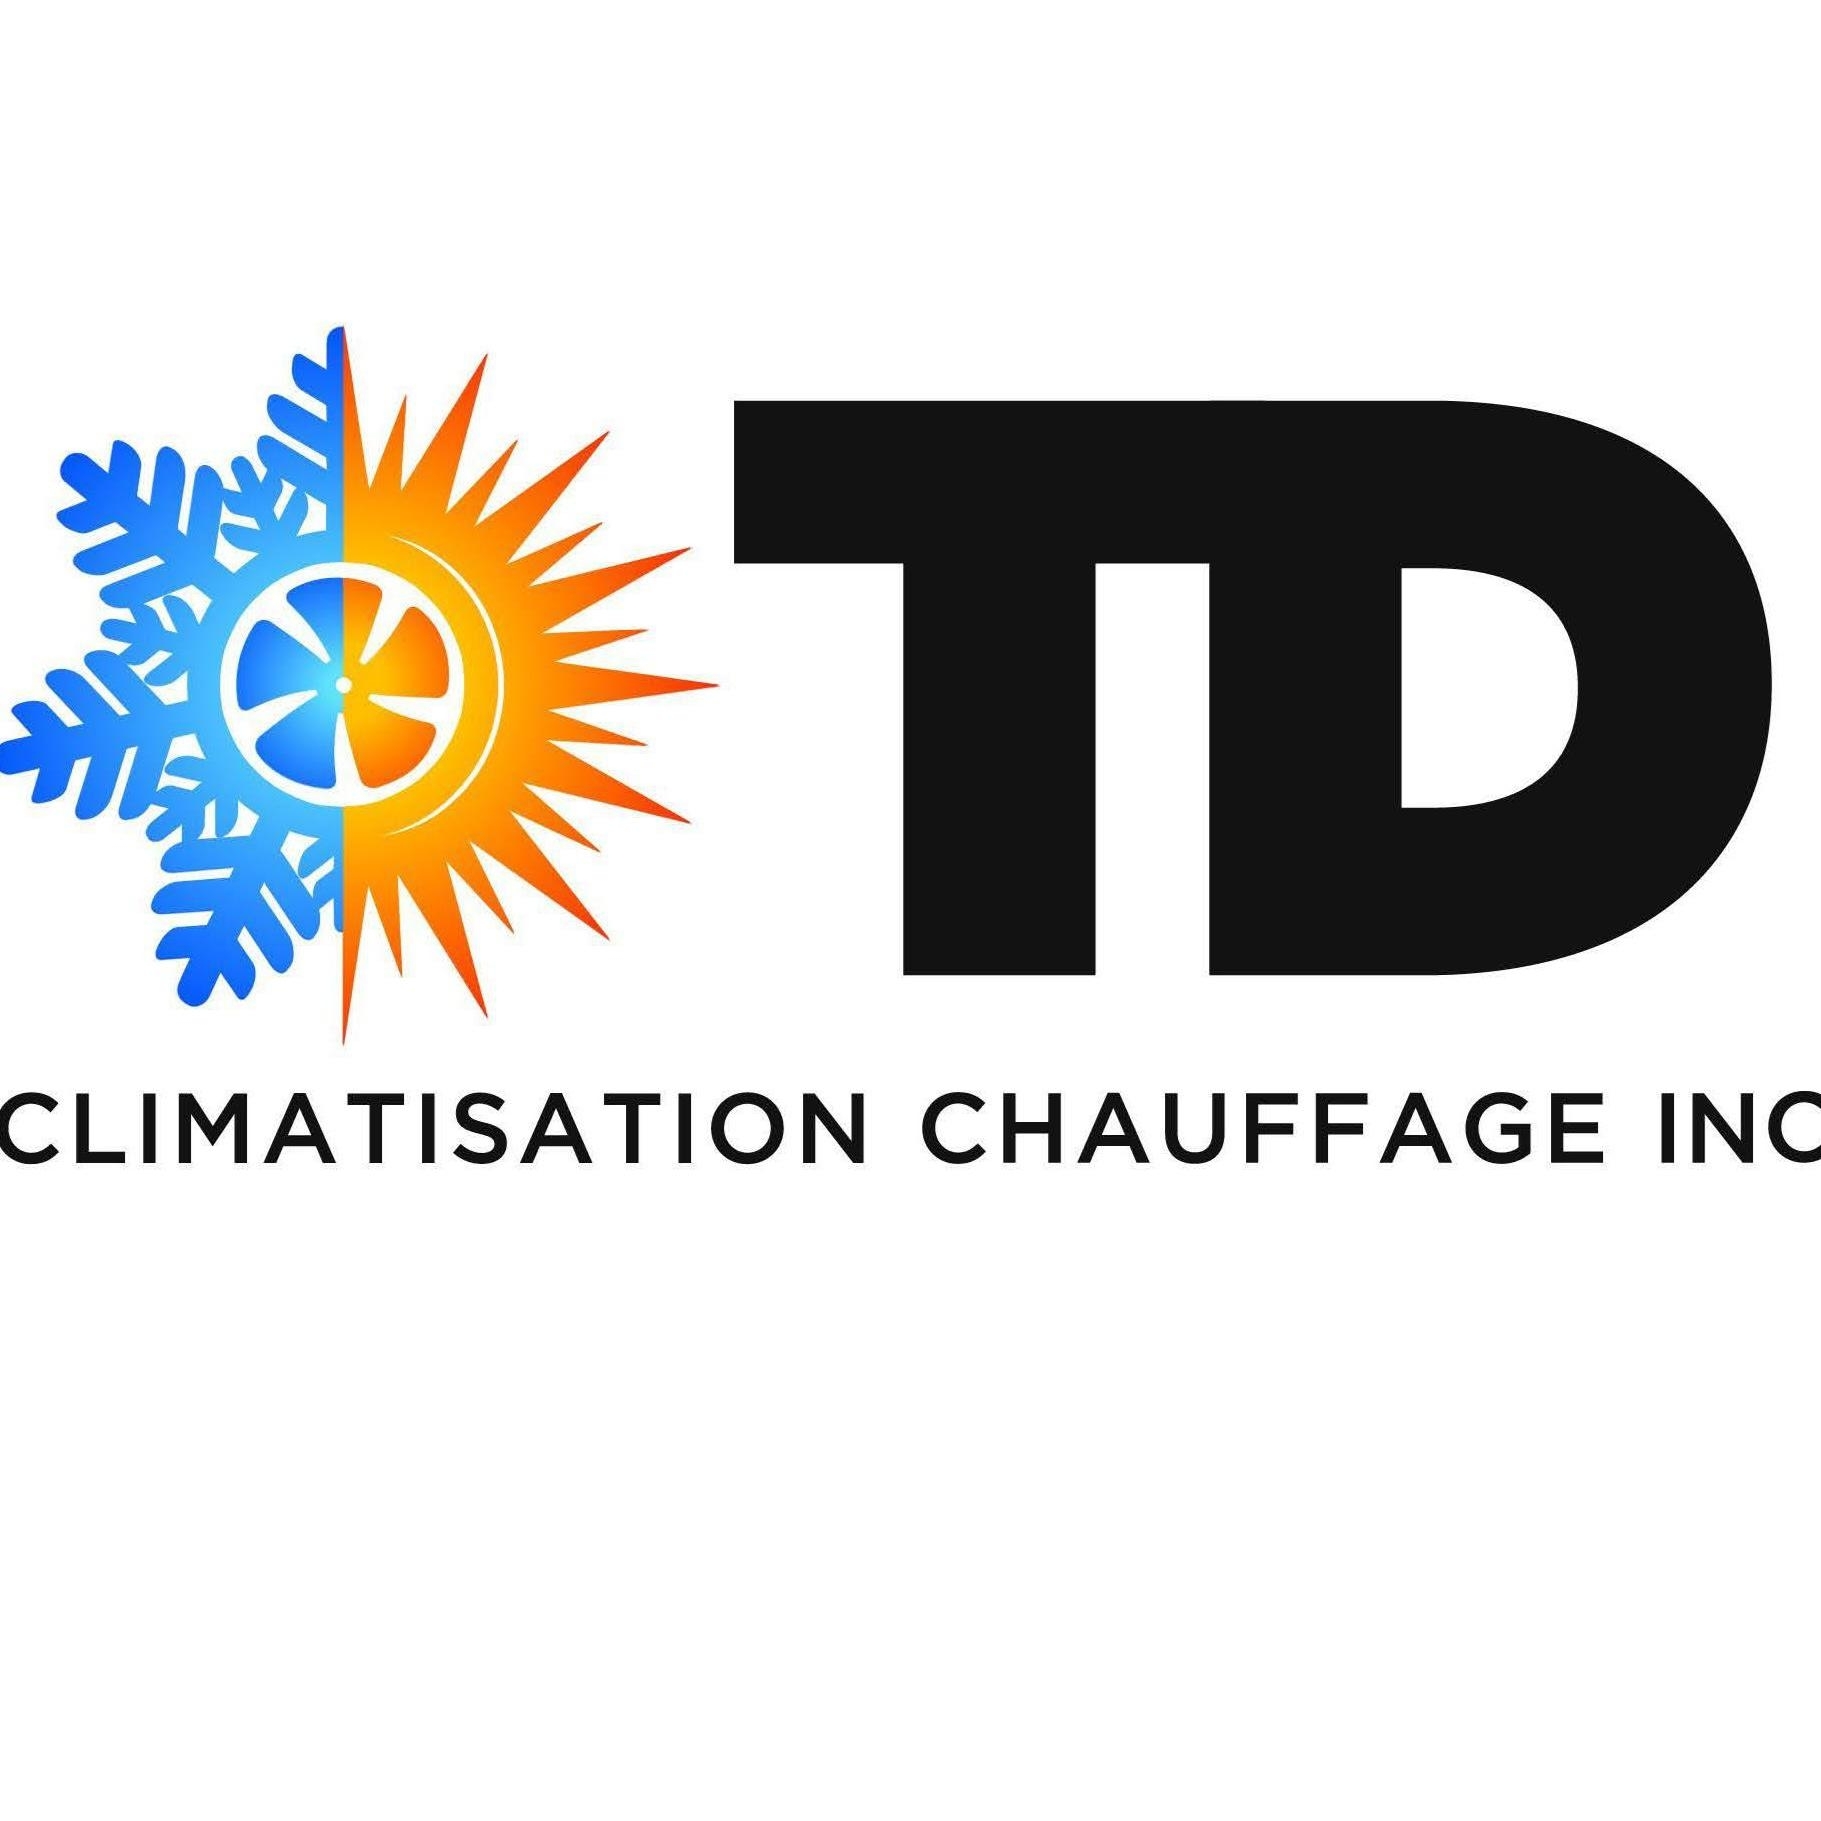 TD Climatisation Chauffage Inc. Mascouche - Heating Contractors